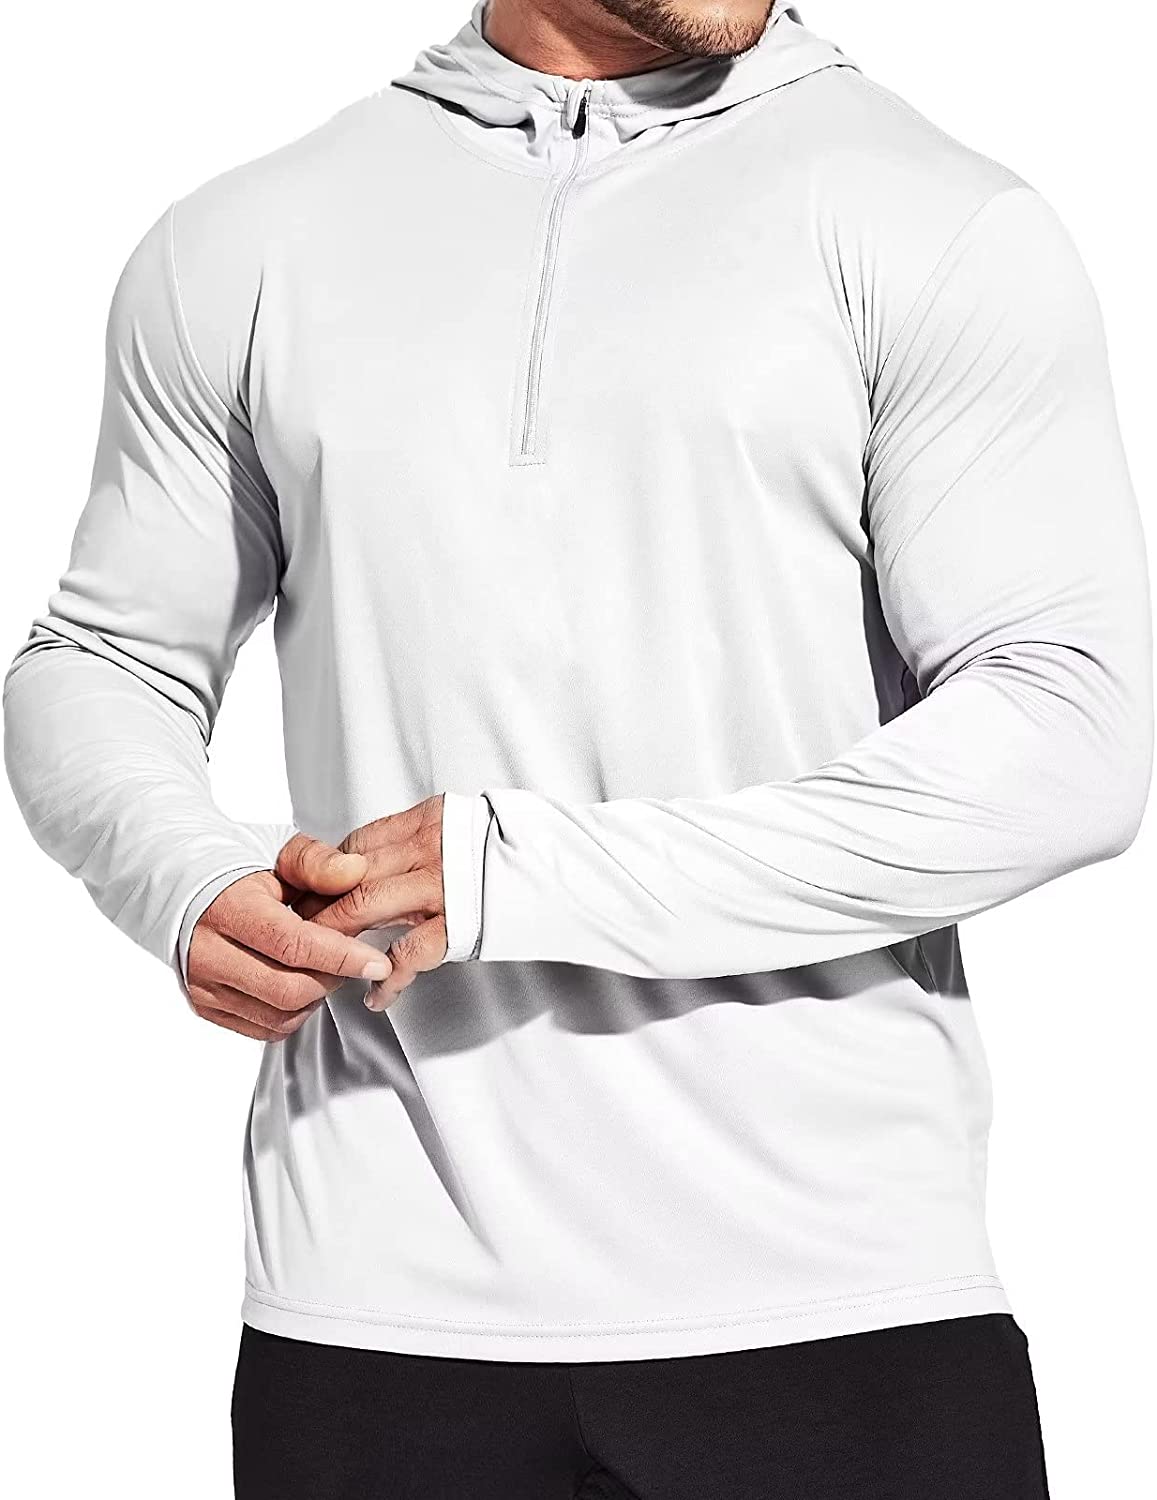 Sun Protection Hoodie Long Sleeve Lightweight Outdoor SPF Fishing UV Shirts with Chest Pocket TOMIDOO Men's 1/4 Zip UPF 50 